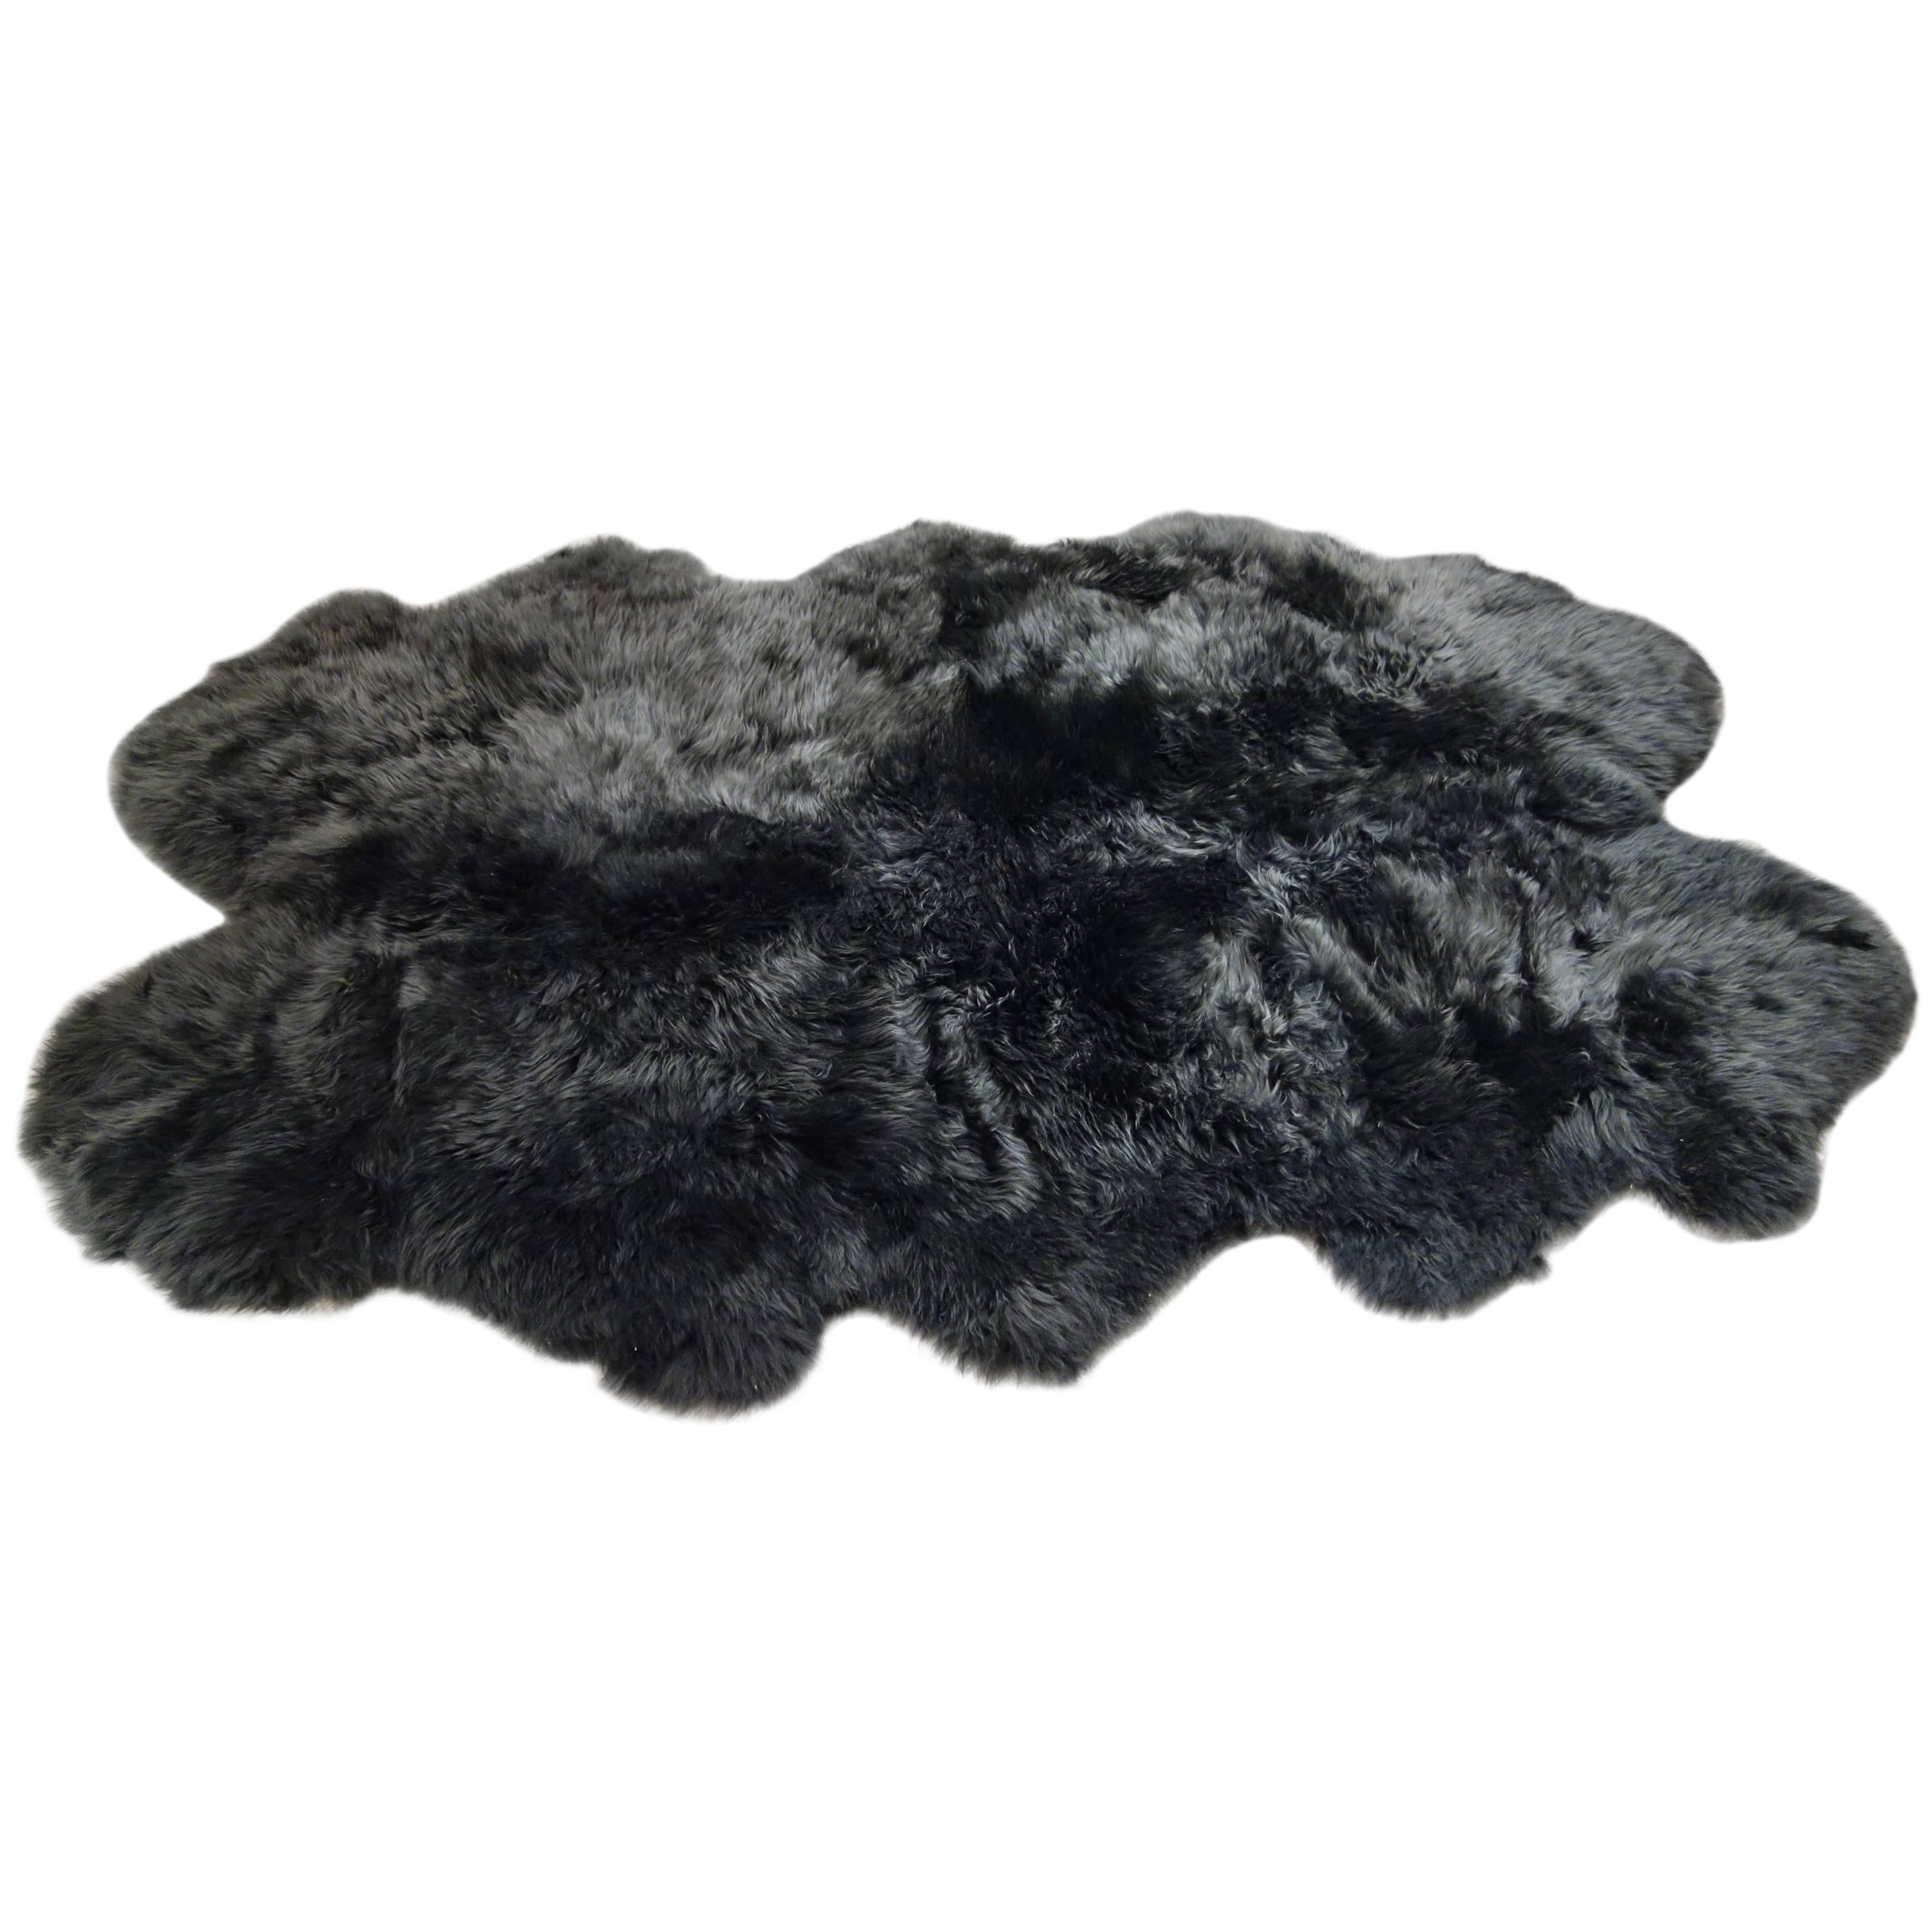 New 6' x 4' Charcoal Gray Plush Sheepskin Rug, Five Available For Sale